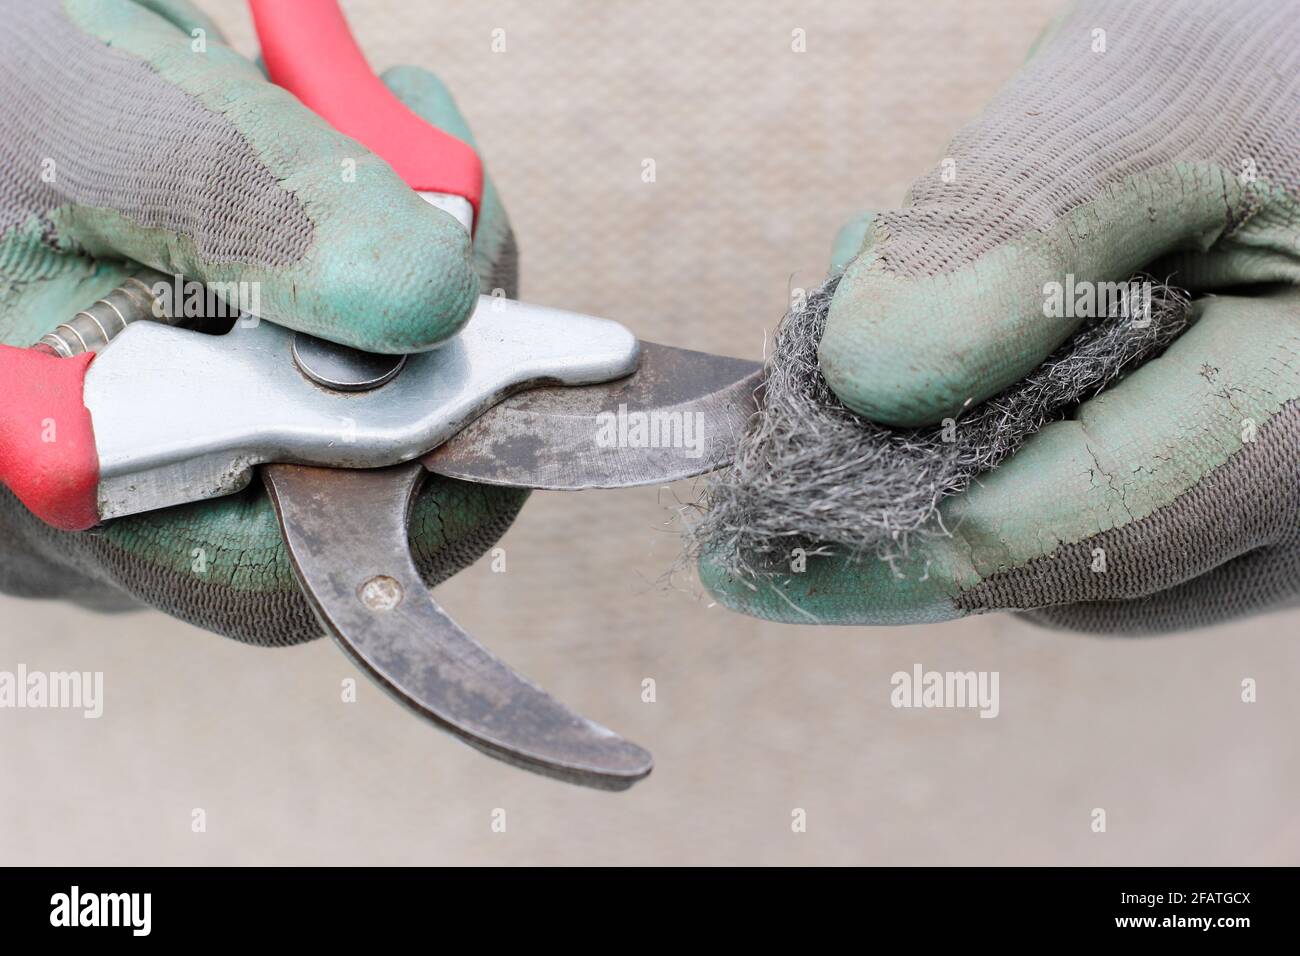 Cleaning secateur blades with wire wool. UK Stock Photo